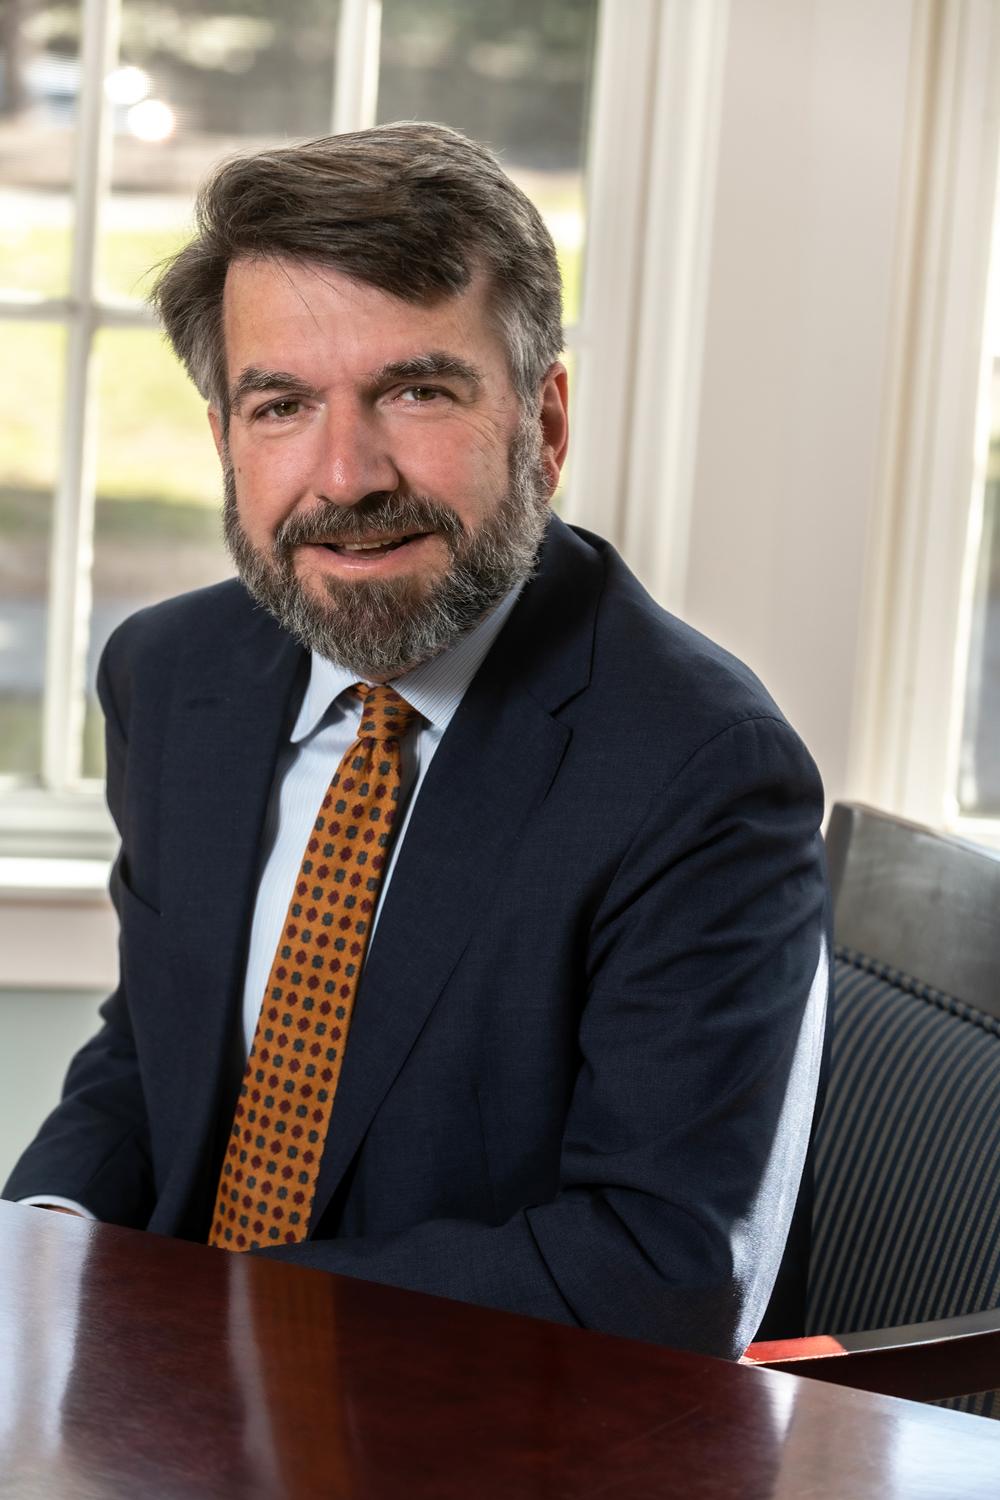 Portrait of David Quigley, University Provost photographed in Waul House.